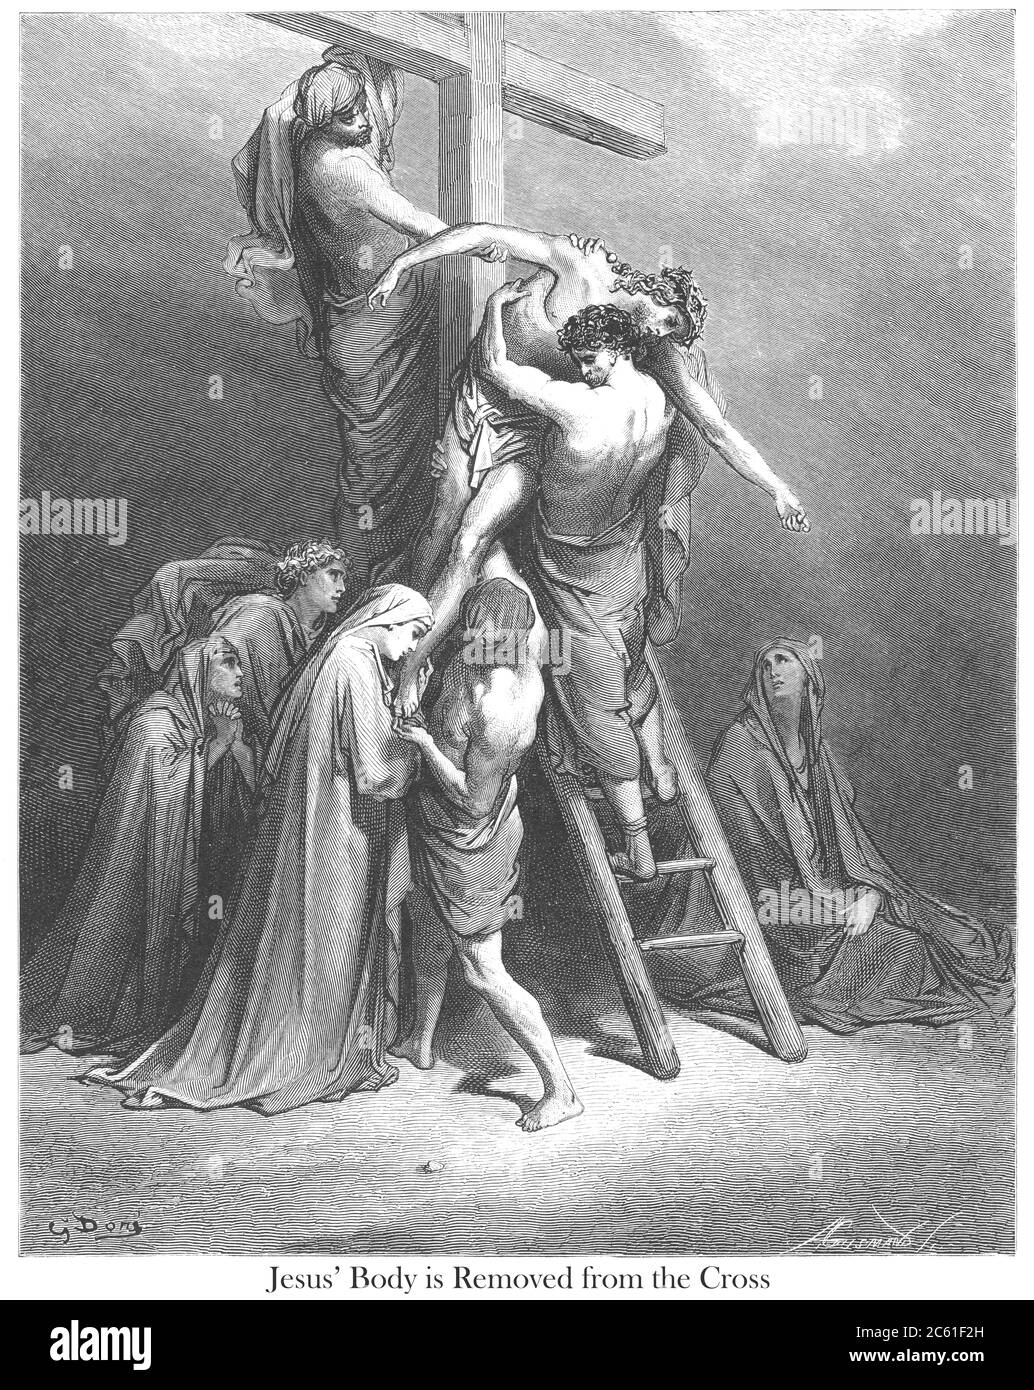 Jesus' body is removed from the Cross (or The Descent From the Cross) [Matthew 27:57-58] From the book 'Bible Gallery' Illustrated by Gustave Dore with Memoir of Dore and Descriptive Letter-press by Talbot W. Chambers D.D. Published by Cassell & Company Limited in London and simultaneously by Mame in Tours, France in 1866 Stock Photo